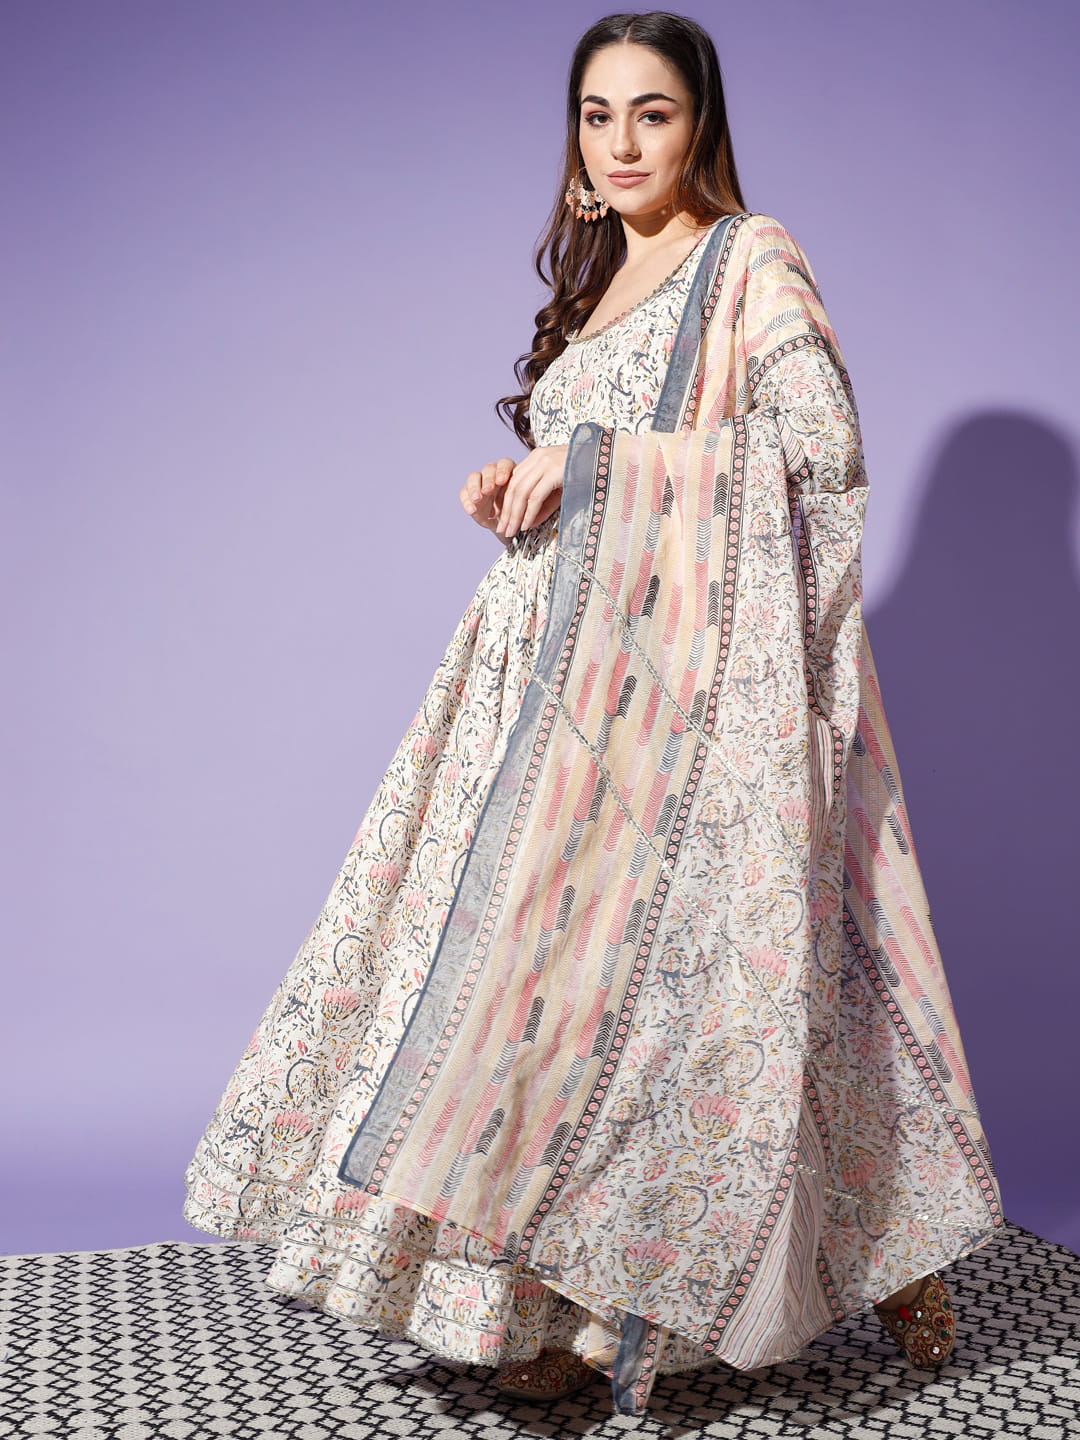 Mystical Blooms: An Off-White 2-Piece Kurta with Printed Dupatta | Hues of India